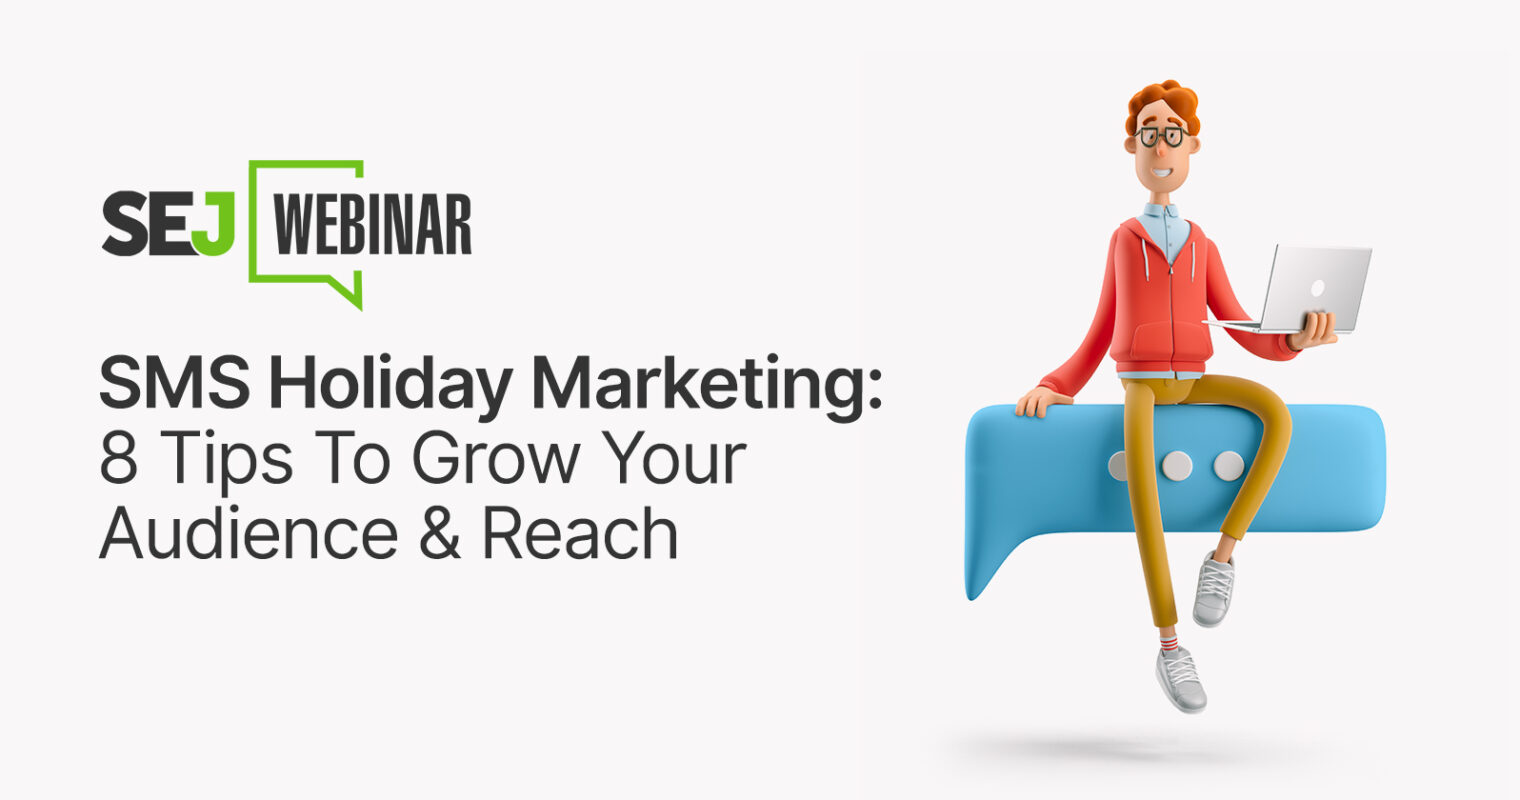 SMS Holiday Marketing: 8 Tips To Grow Your Audience & Reach [Webinar]